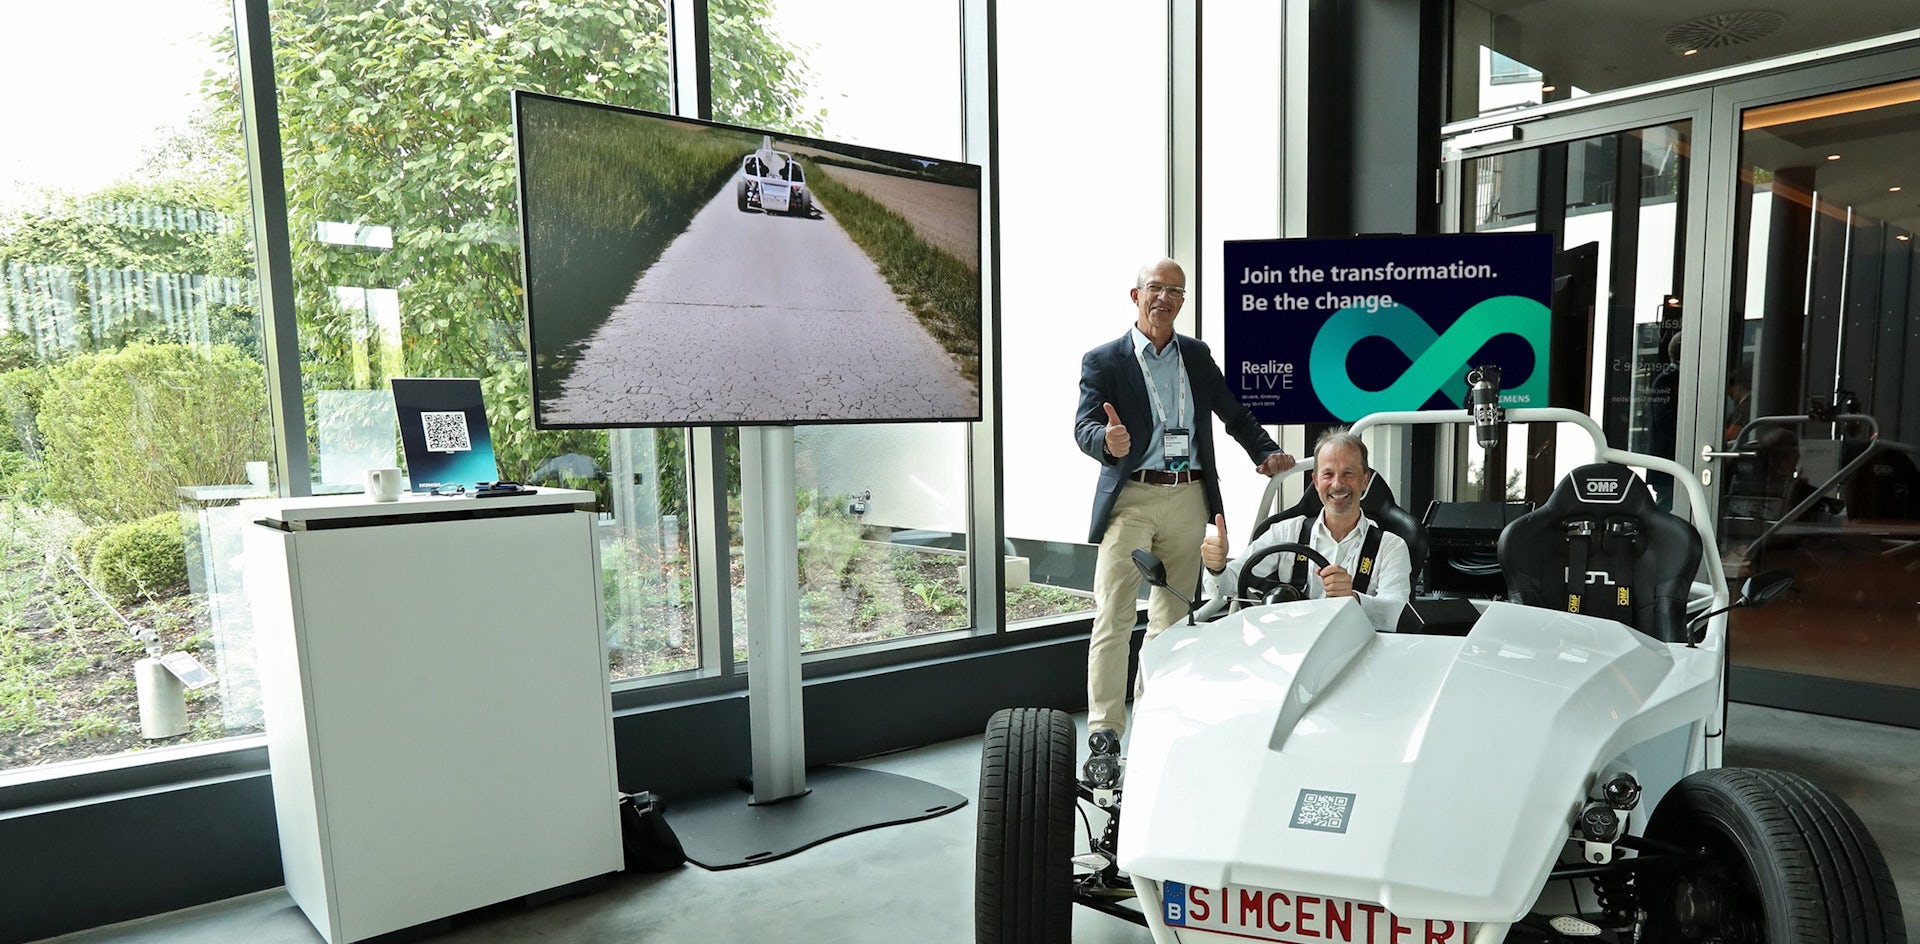 A Siemens exhibit presenter looks on, as a Realize LIVE attendee participates in a demo of a car and Simcenter software,